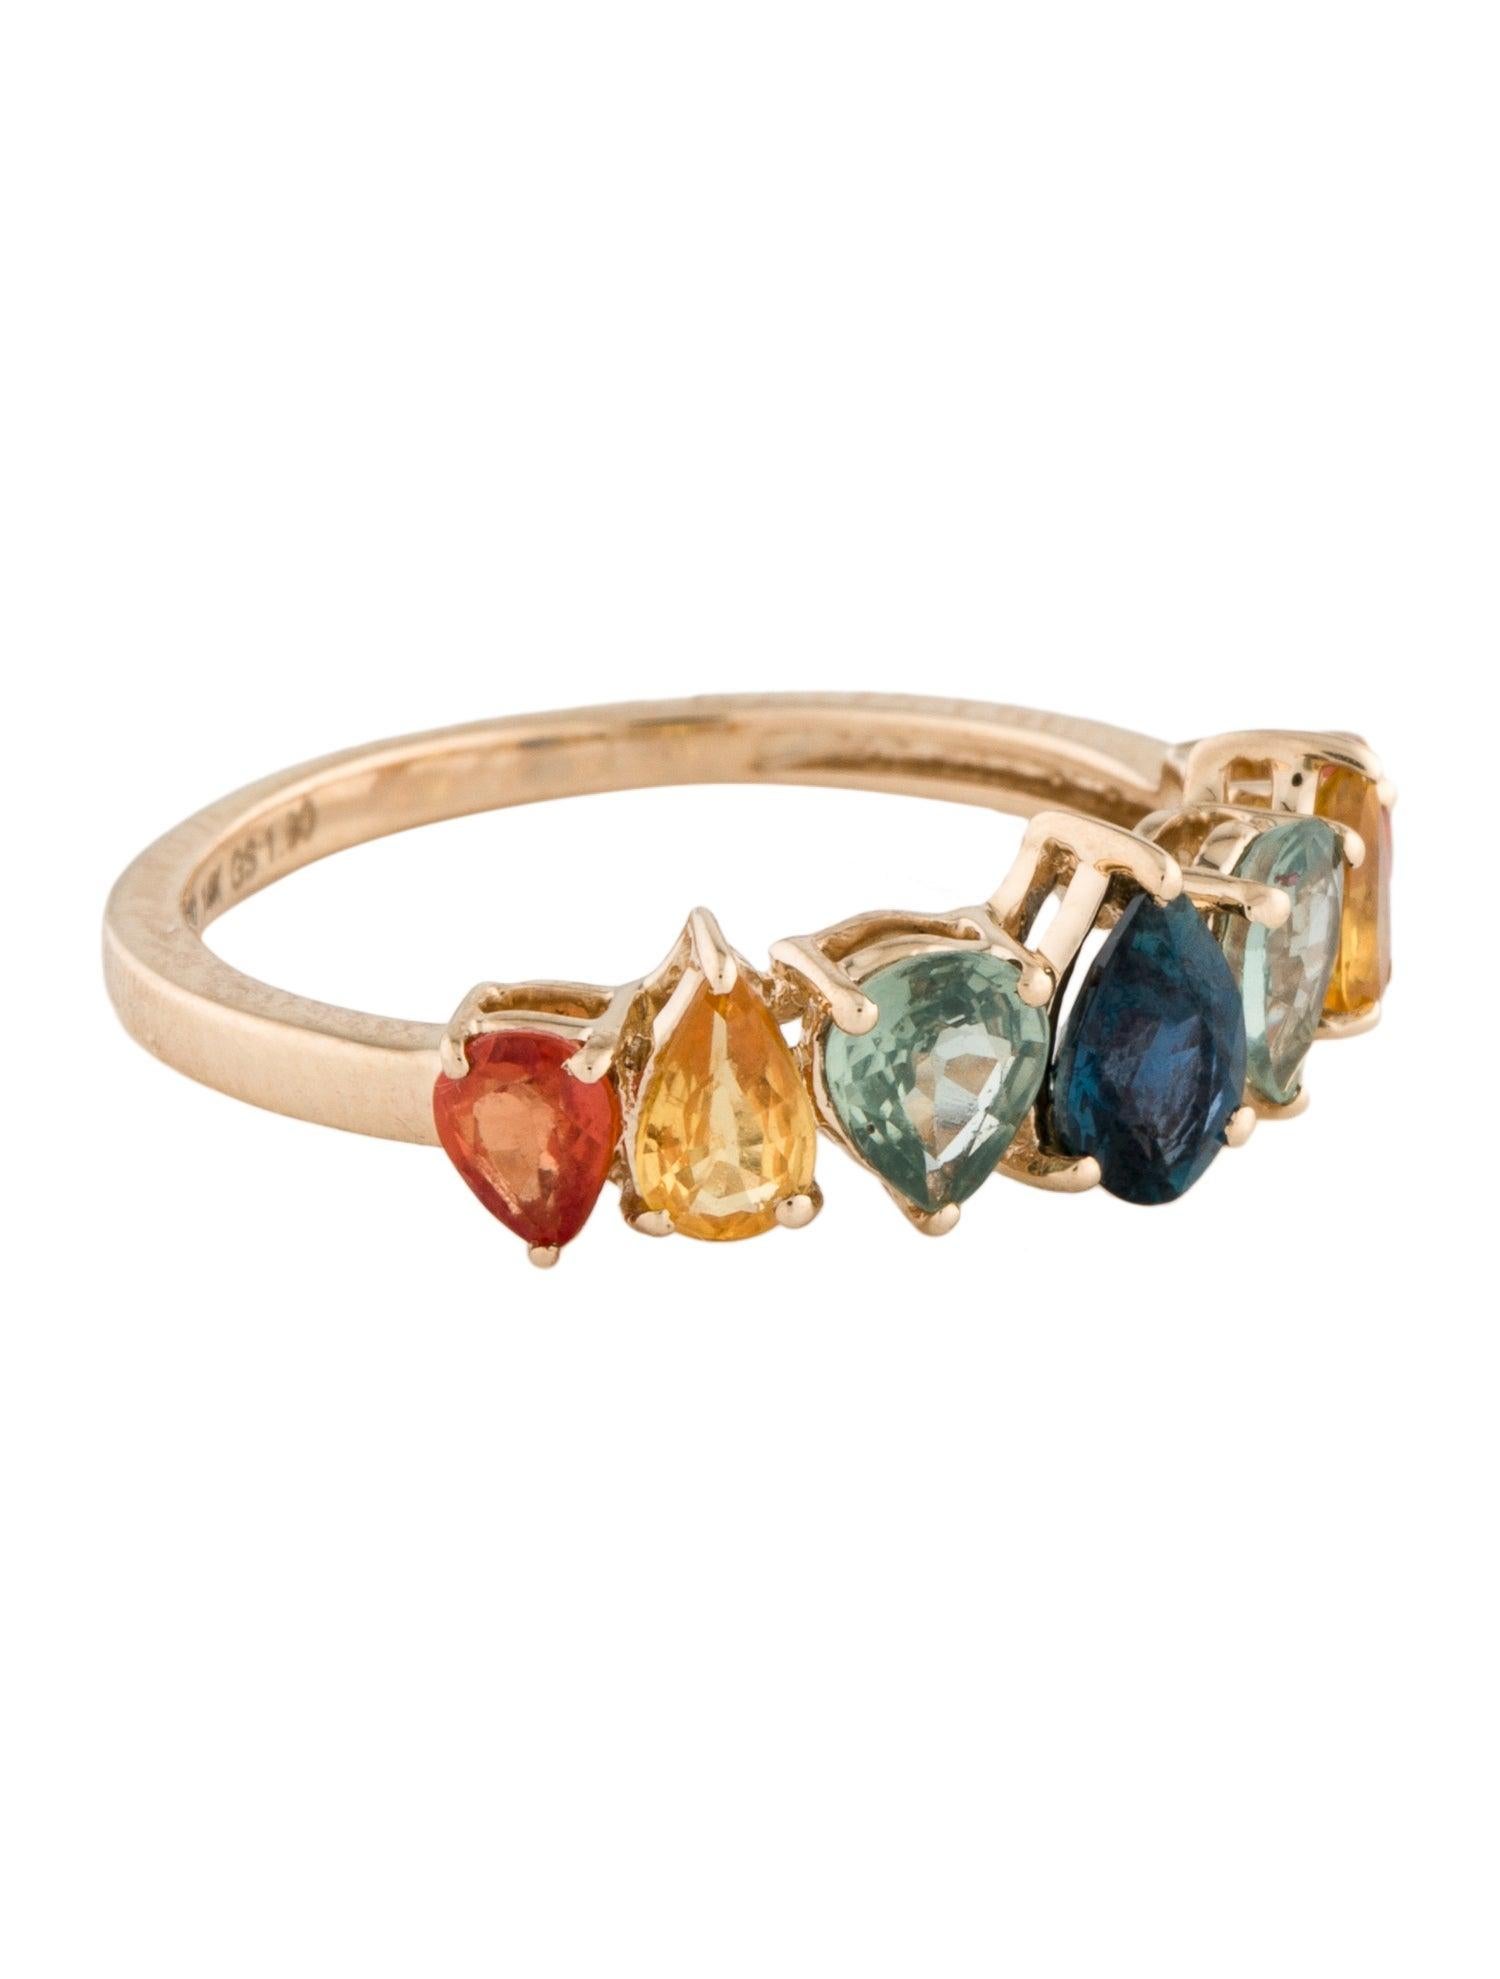 Description:
Embrace the brilliance of color with our 14K Yellow Gold Sapphire Multi-Color Band, a dazzling testament to unique design and craftsmanship. This exquisite piece, sized at 7, features an array of 1.9 carats of Pear Modified Brilliant